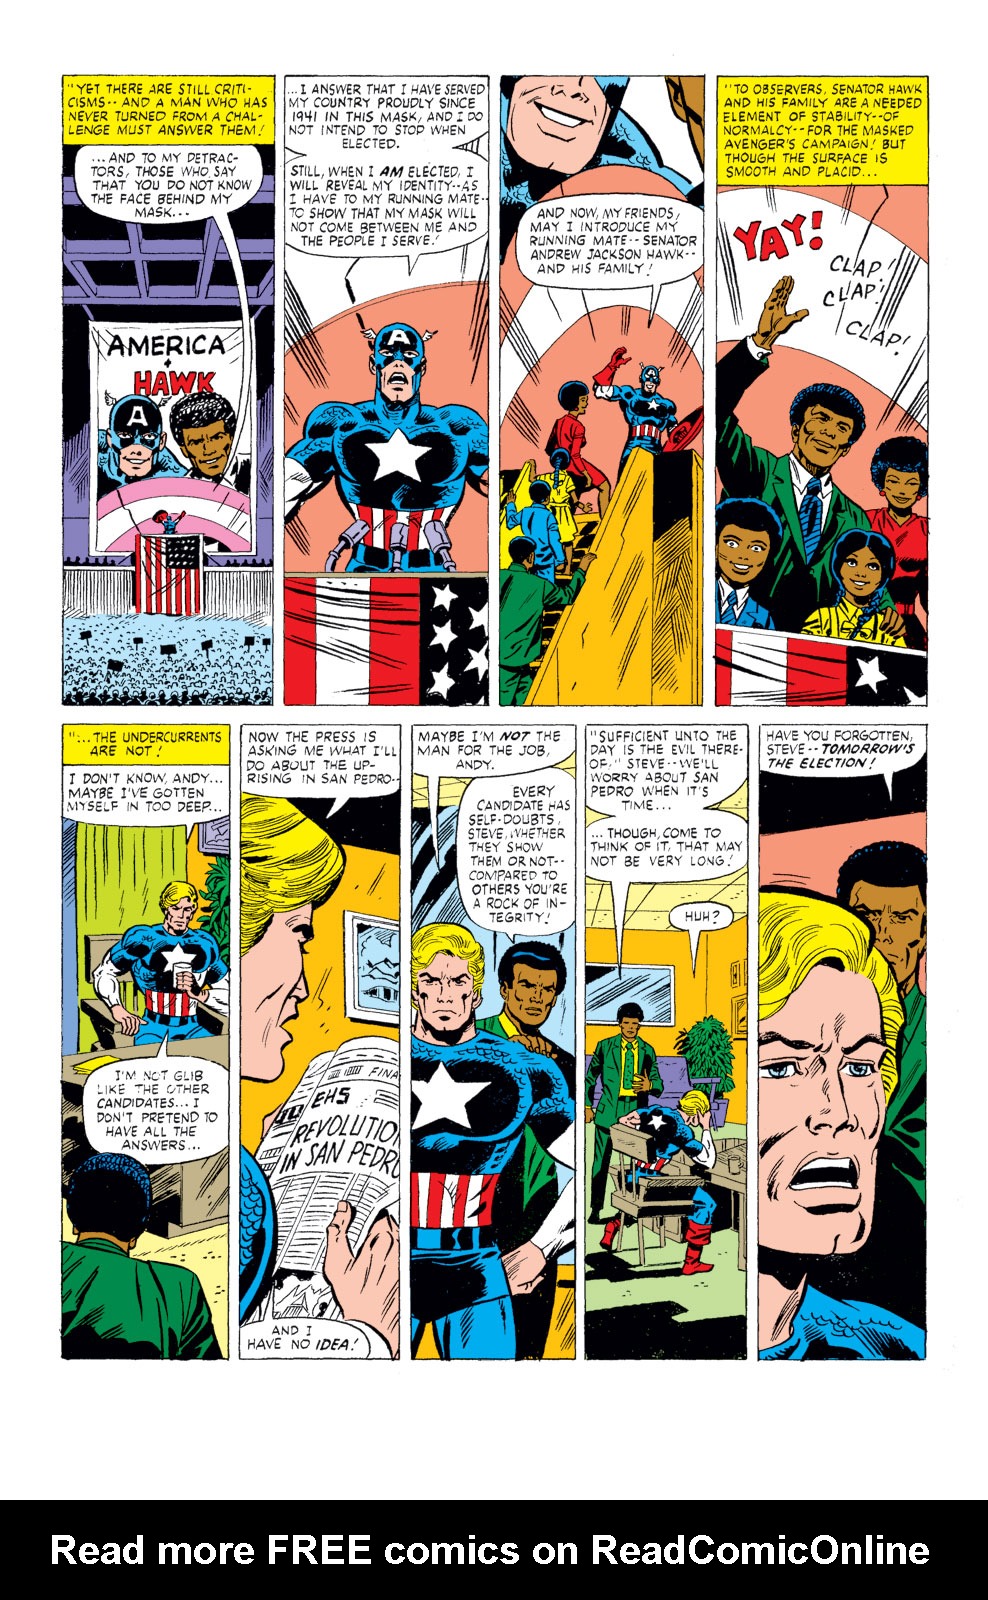 What If? (1977) issue 26 - Captain America had been elected president - Page 8